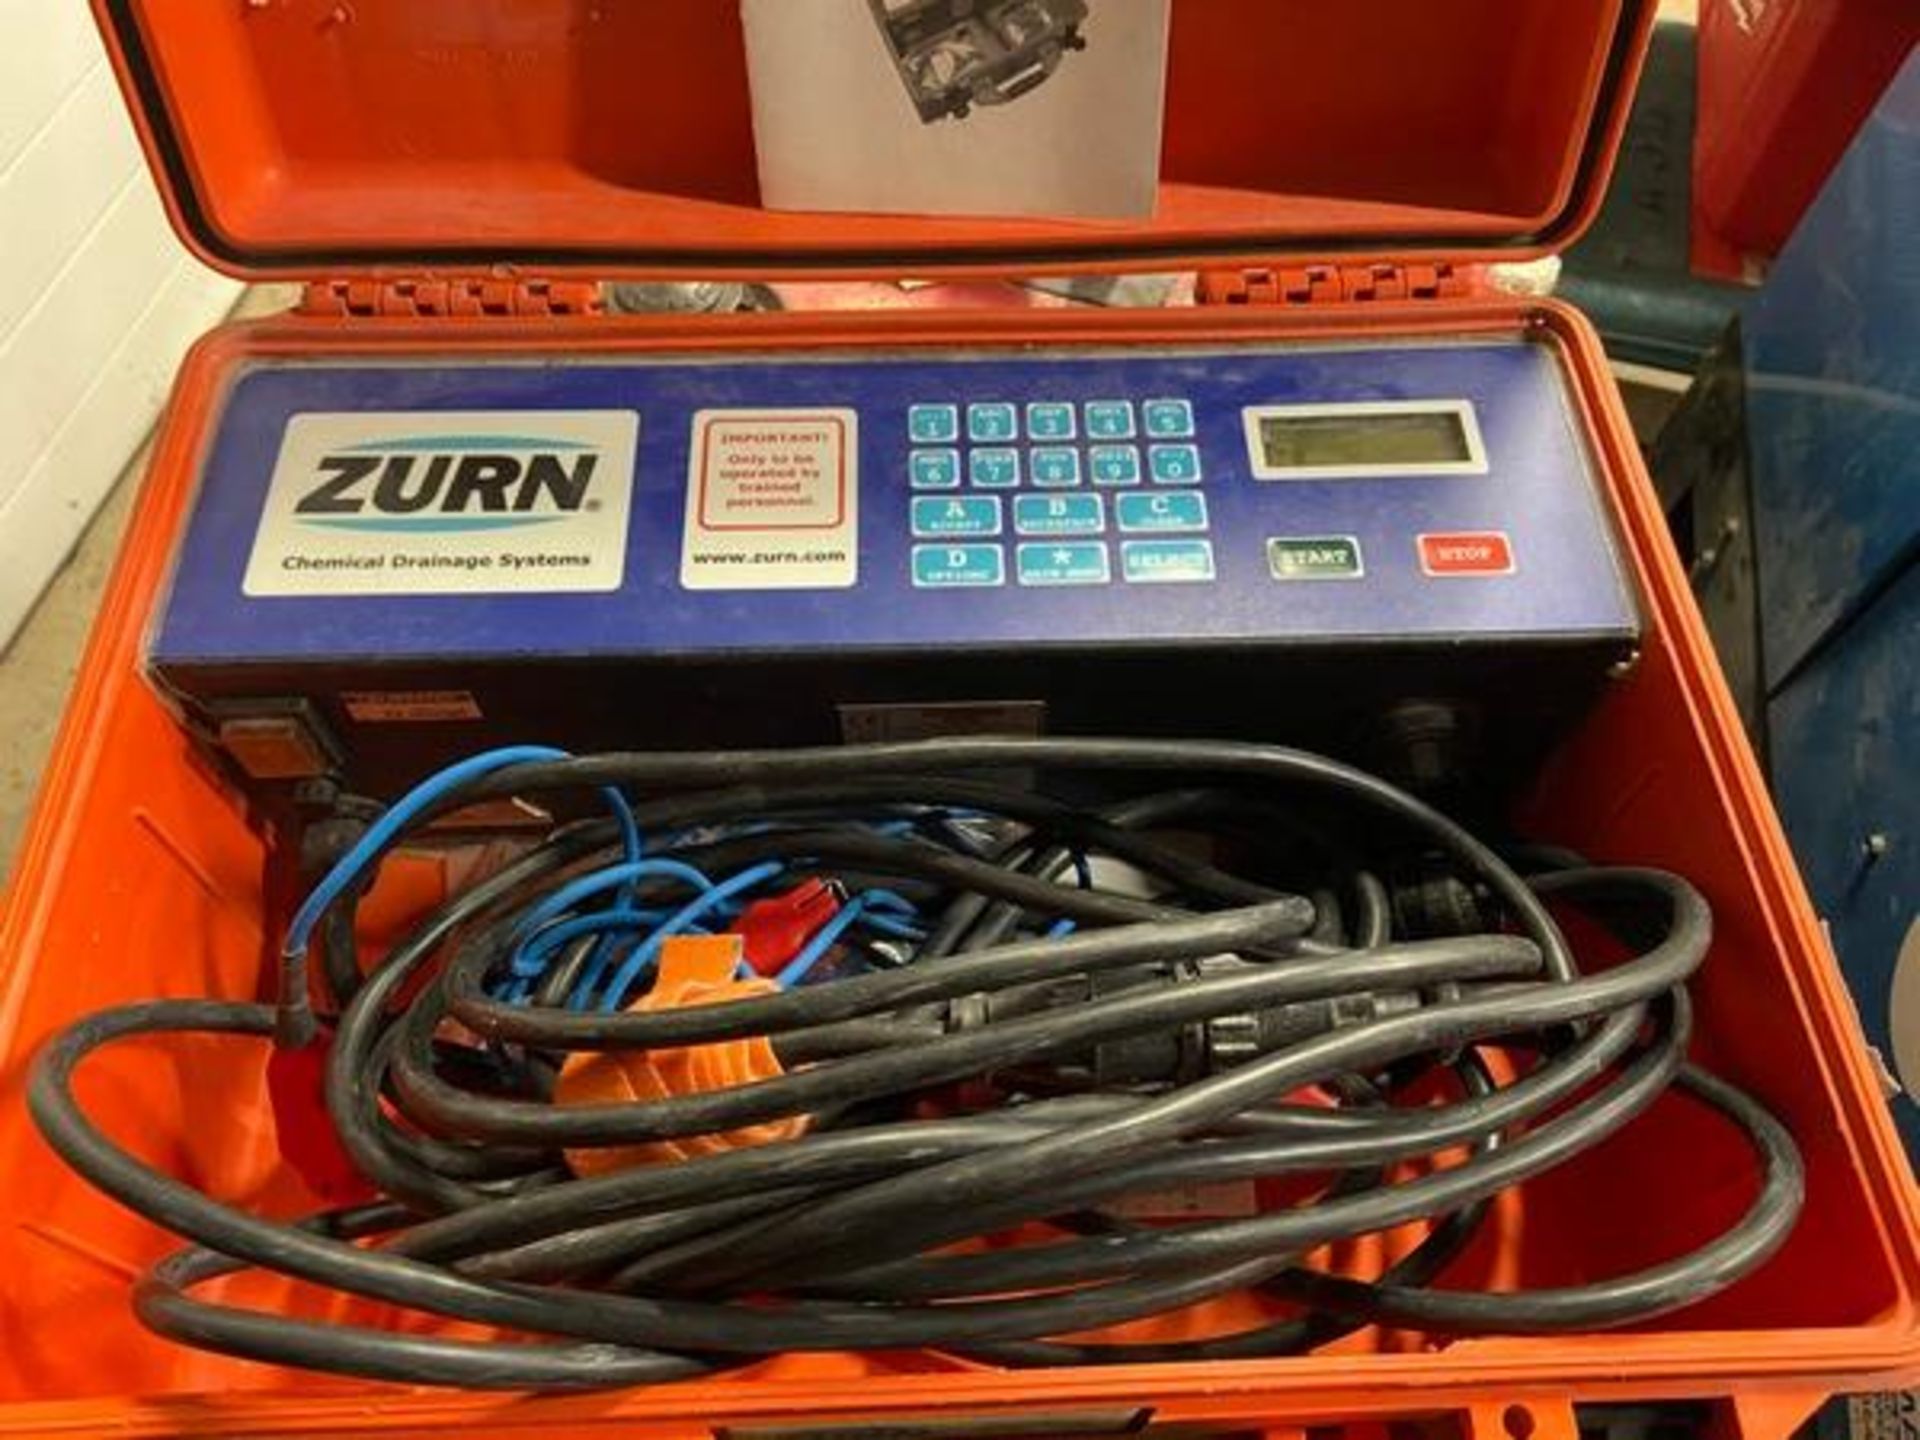 ZURN Chemical Drainage Systems Fusion Lock Welding Unit, In Hard Case (LOCATED IN MONROEVILLE, PA) - Bild 2 aus 5